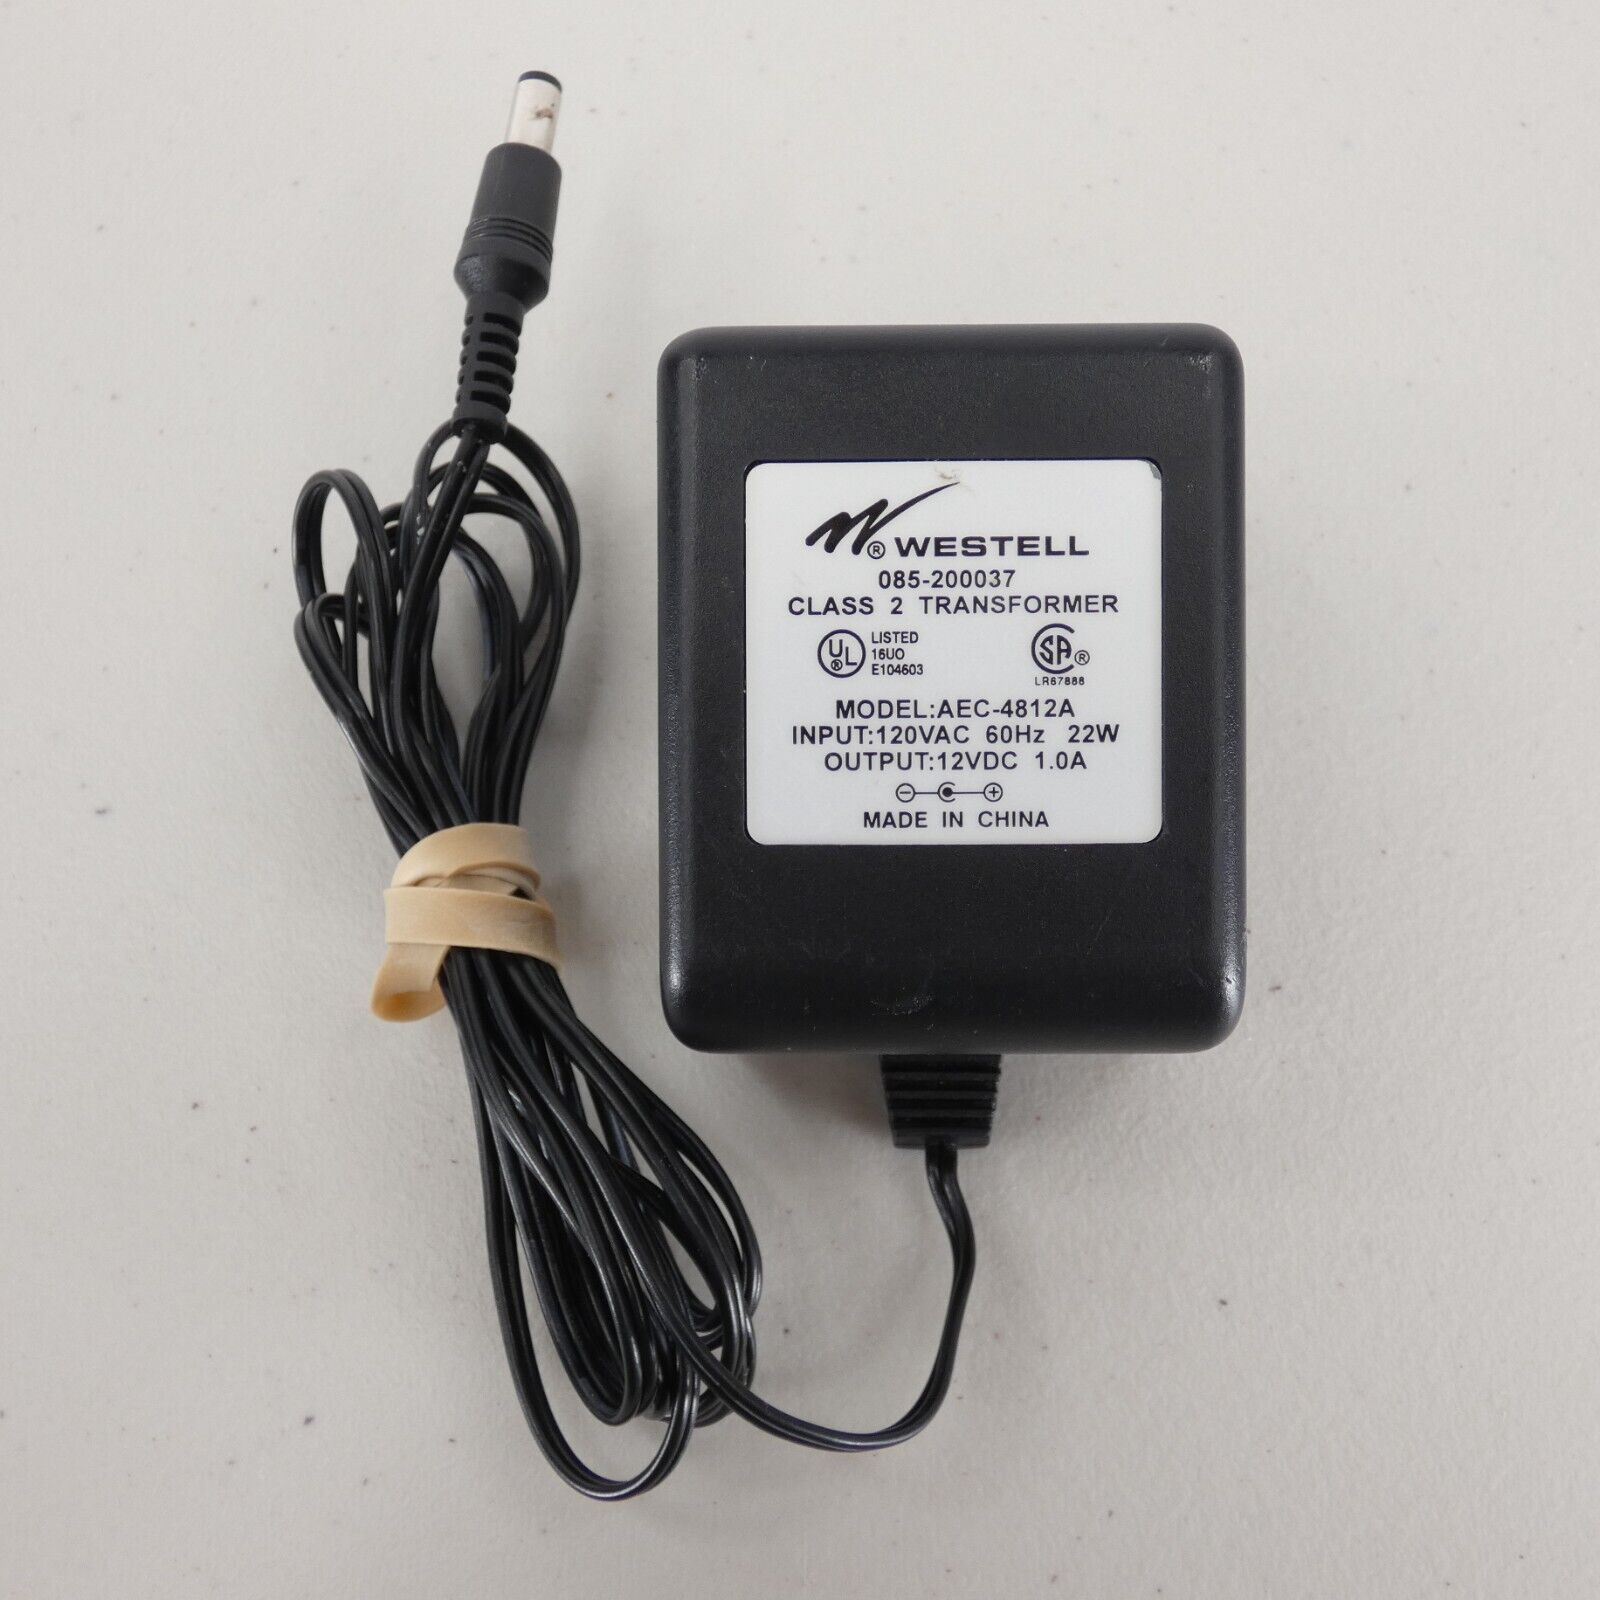 *Brand NEW*Genuine AEC-4812A Westell Class 2 Transformer 085-200037 12 VDC / 1A - Tested Power Supply